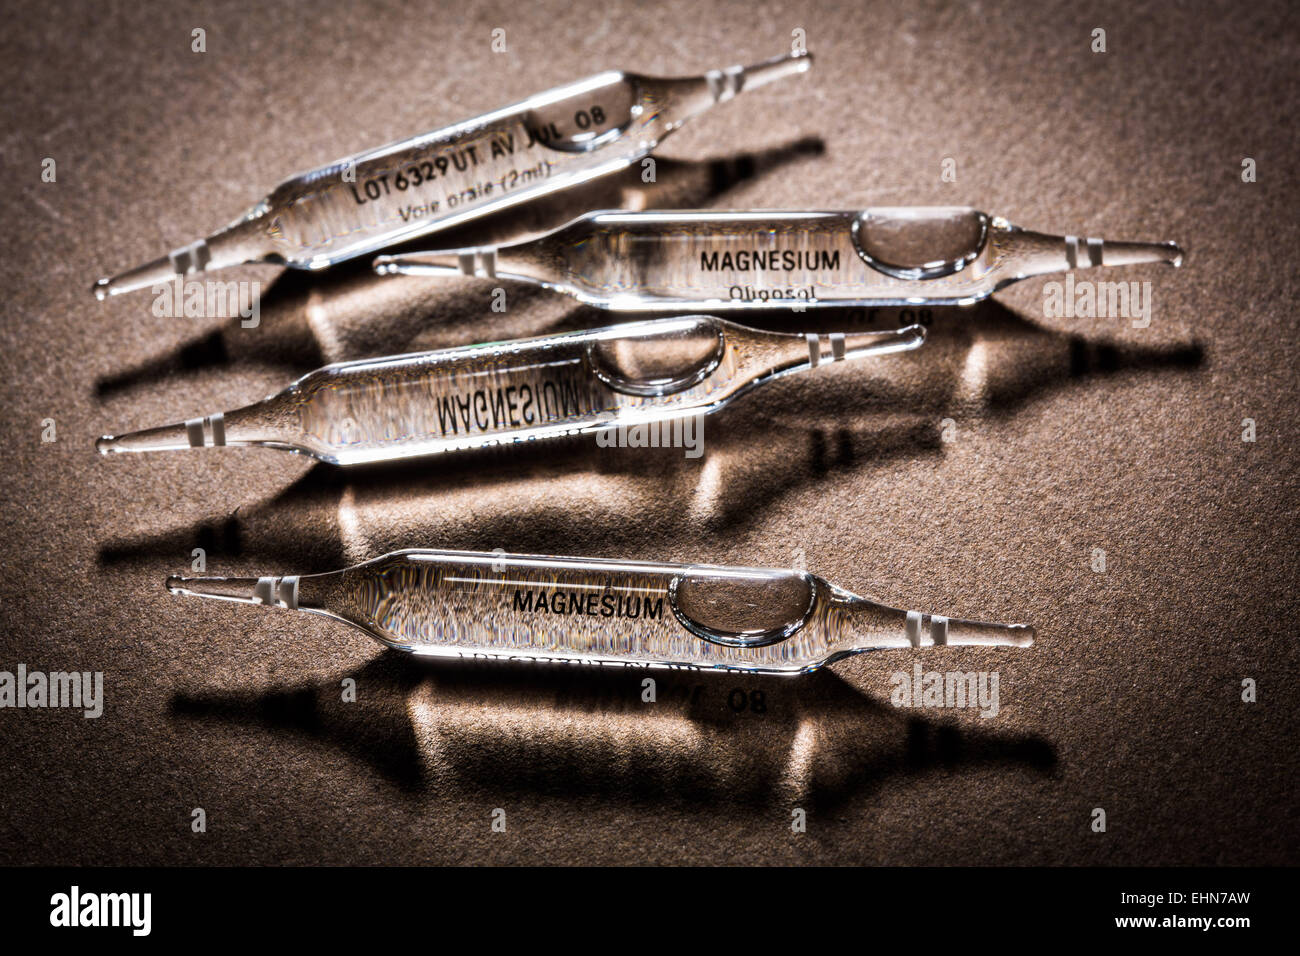 Magnesium glass ampoules. Stock Photo